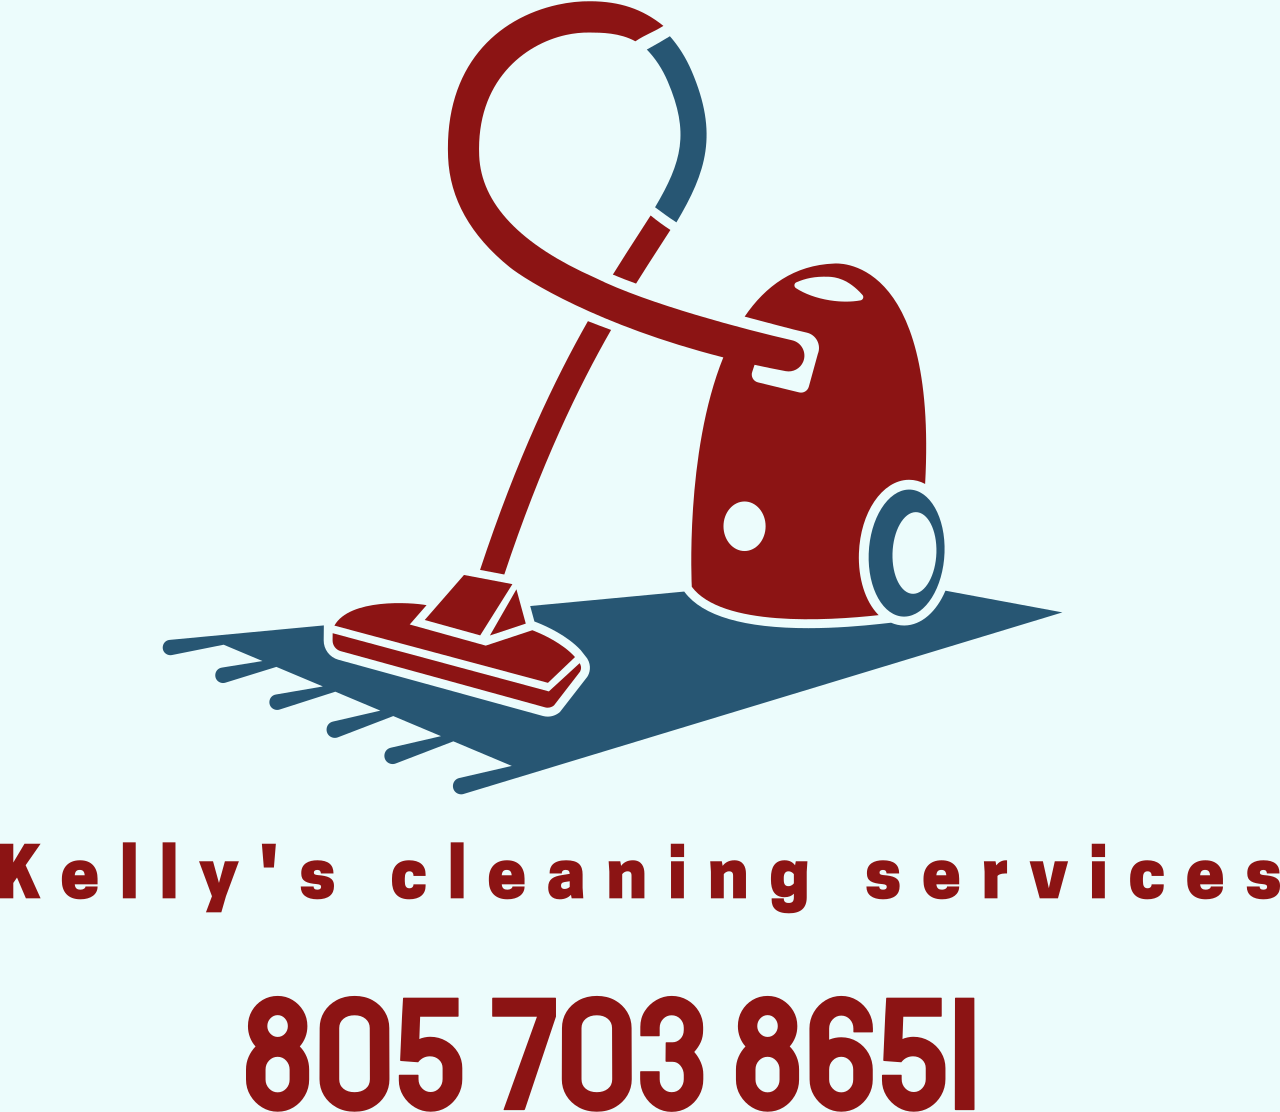 Kelly's cleaning services      

's logo